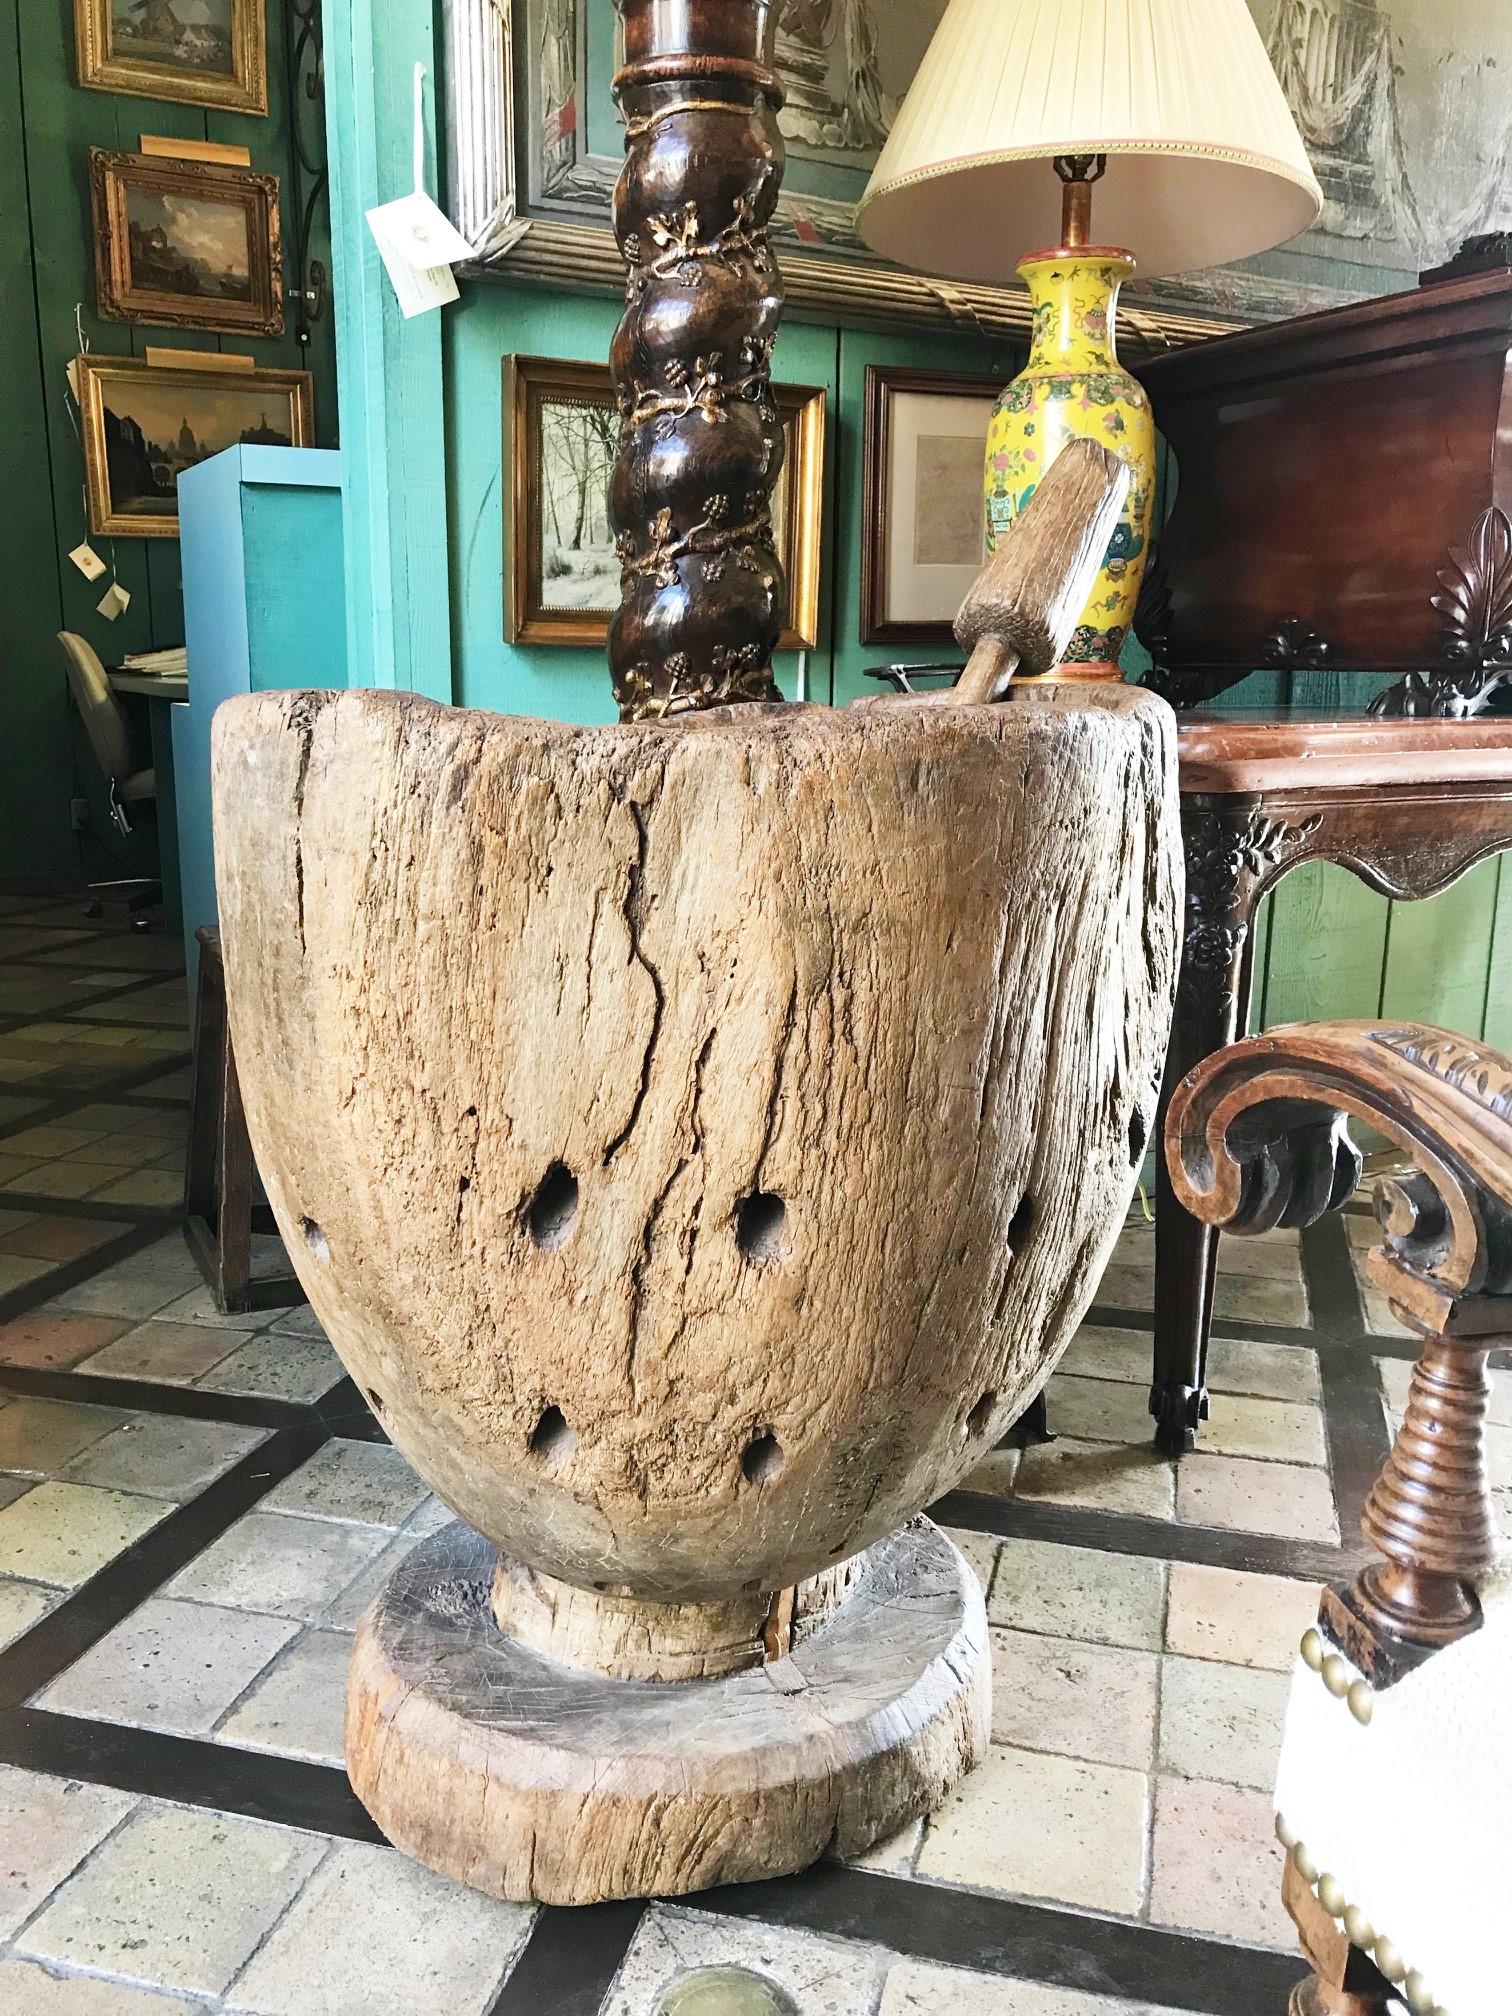 Hand carved wood holder planter vase Jardinière cachepot decorative antiques LA CA . Large 18th / 19th century Hand carved wood mortar and pestle originally created for the corn and coffee. Nice clean lines in a vase shape form mounted on a pedestal